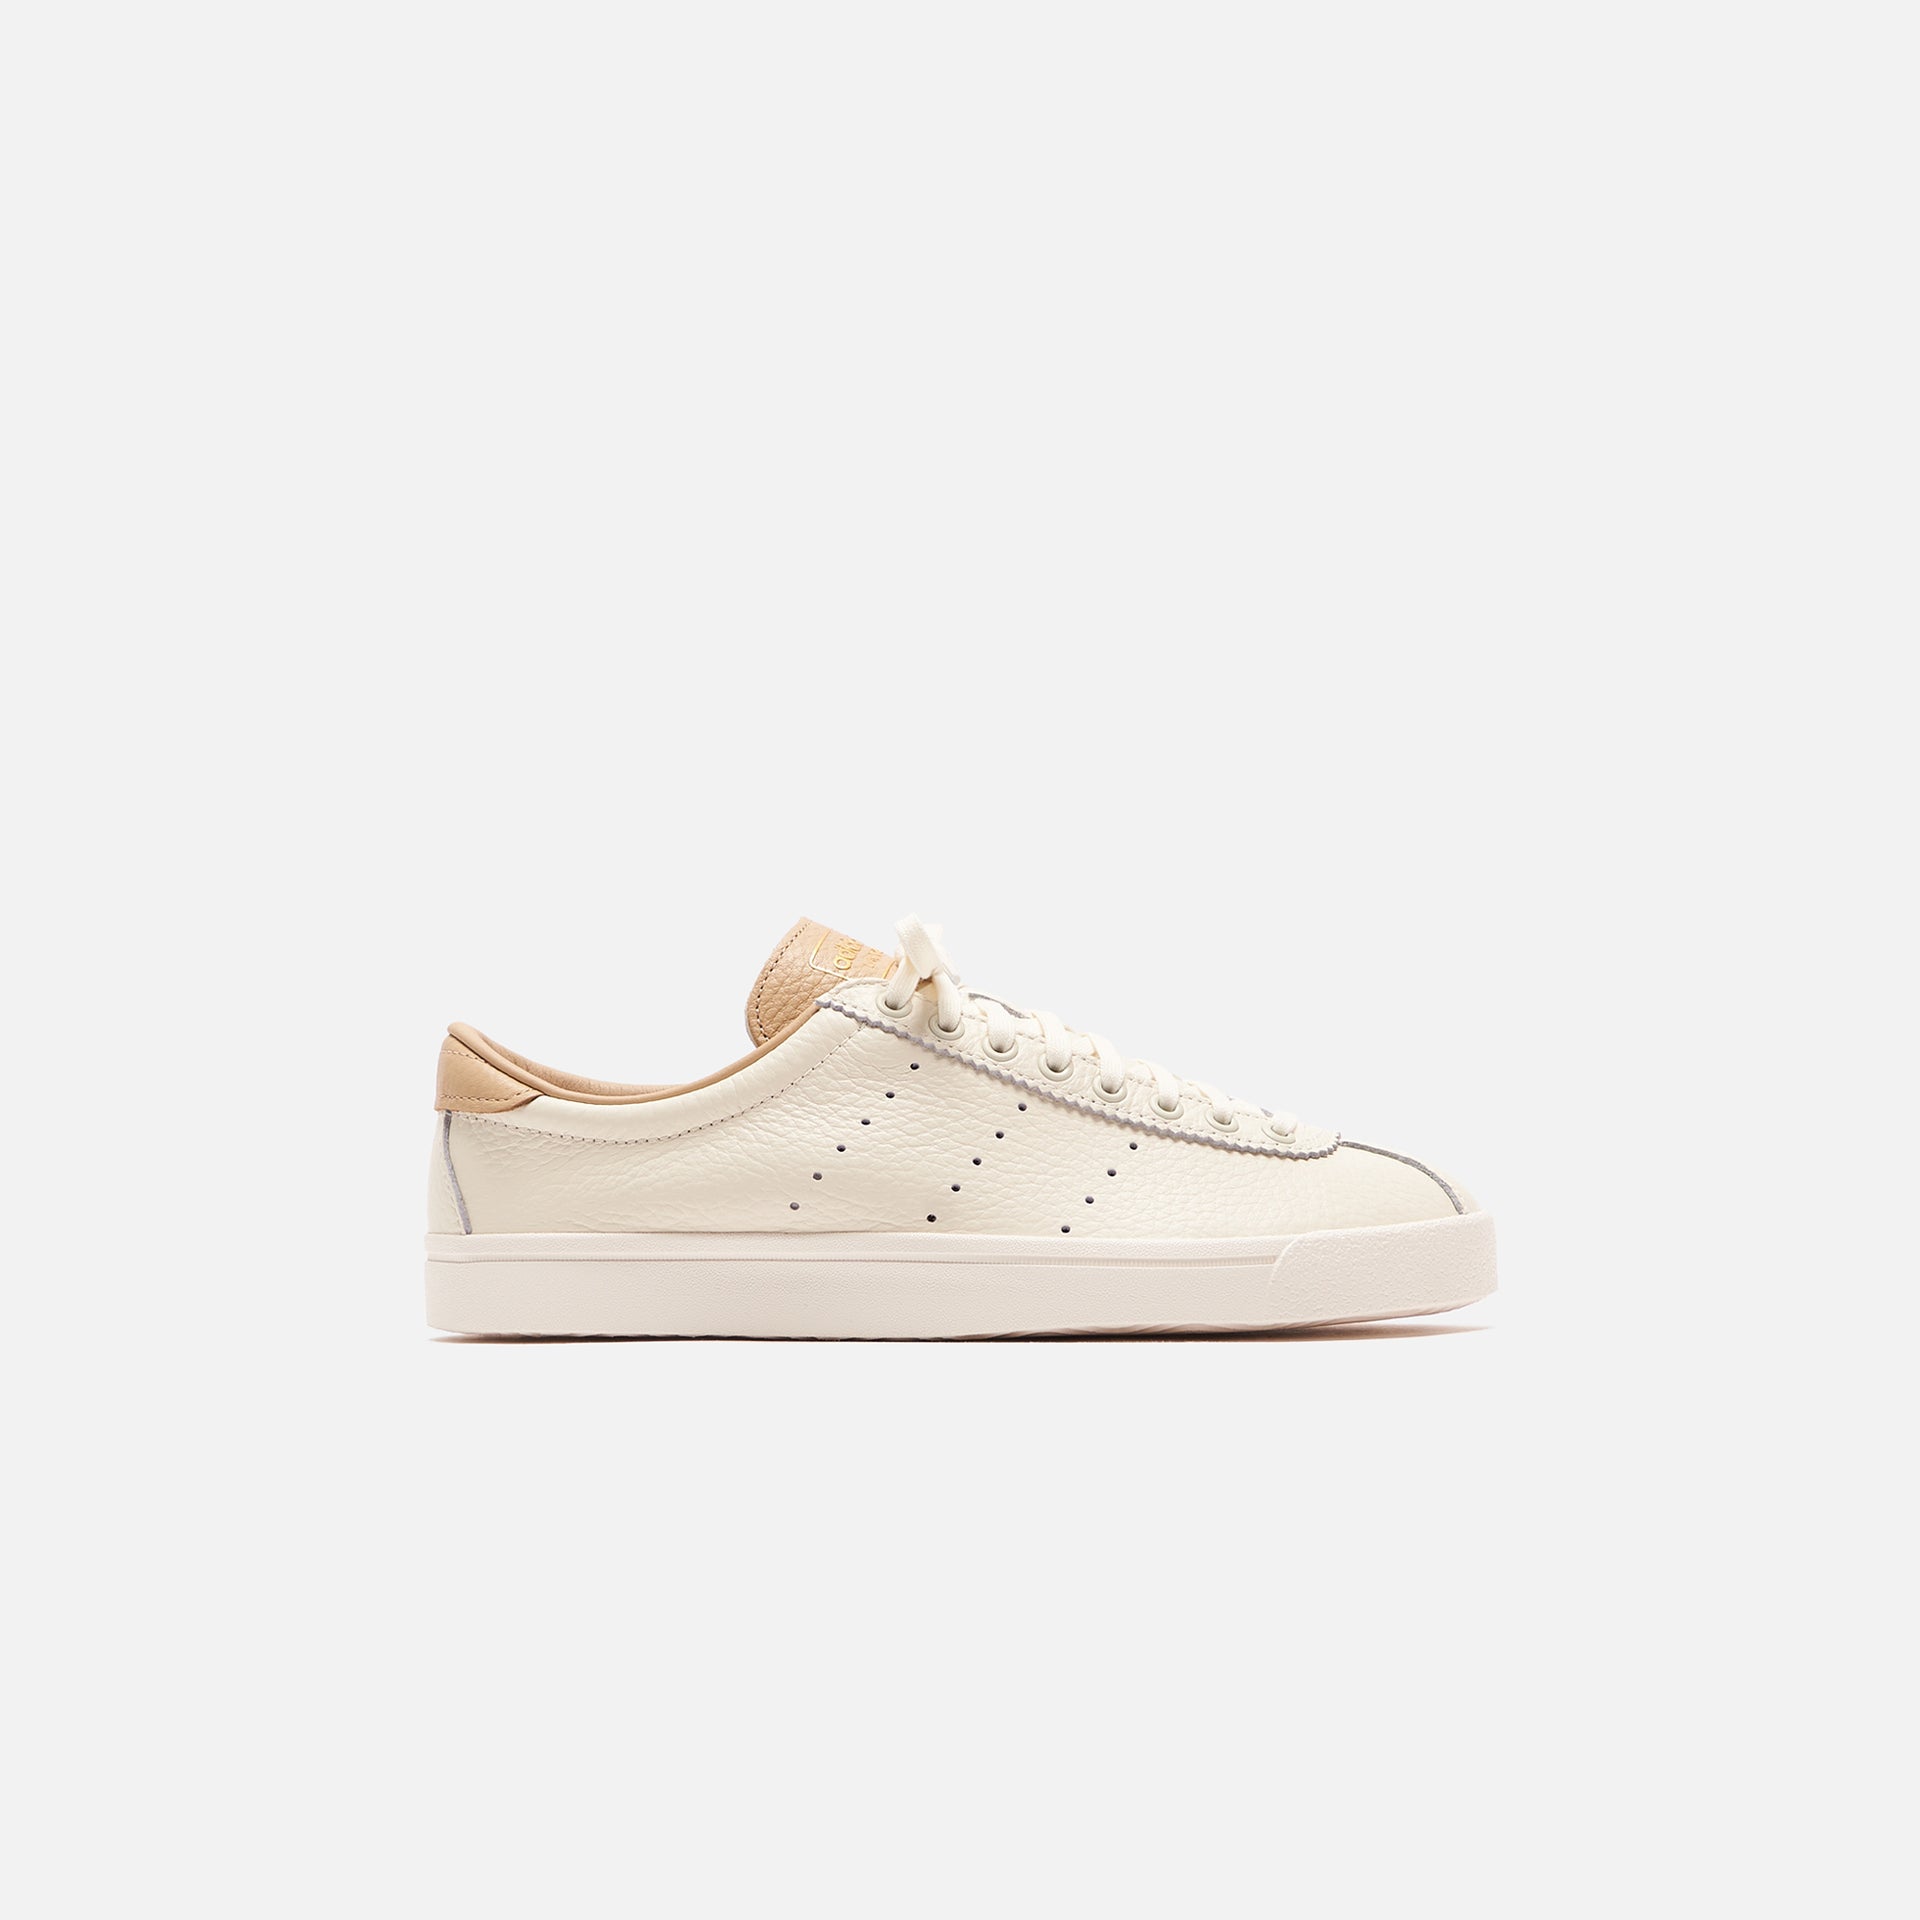 adidas Lacombe - Off White / Pale Nude